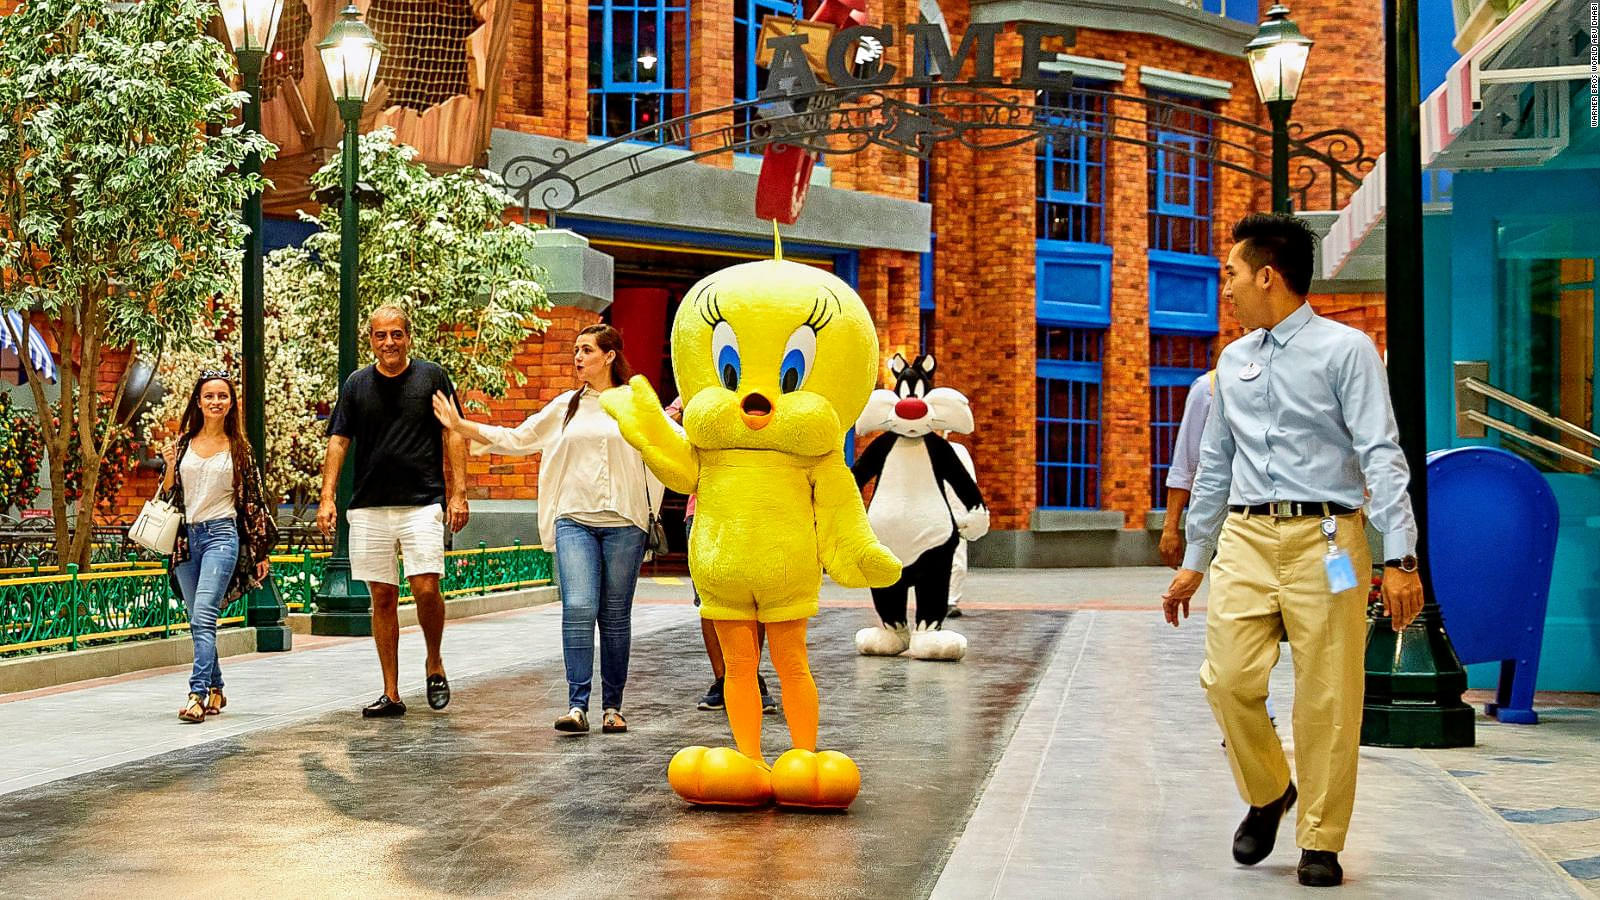 Have a meet and greet with Looney tunes's iconic character, Tweety